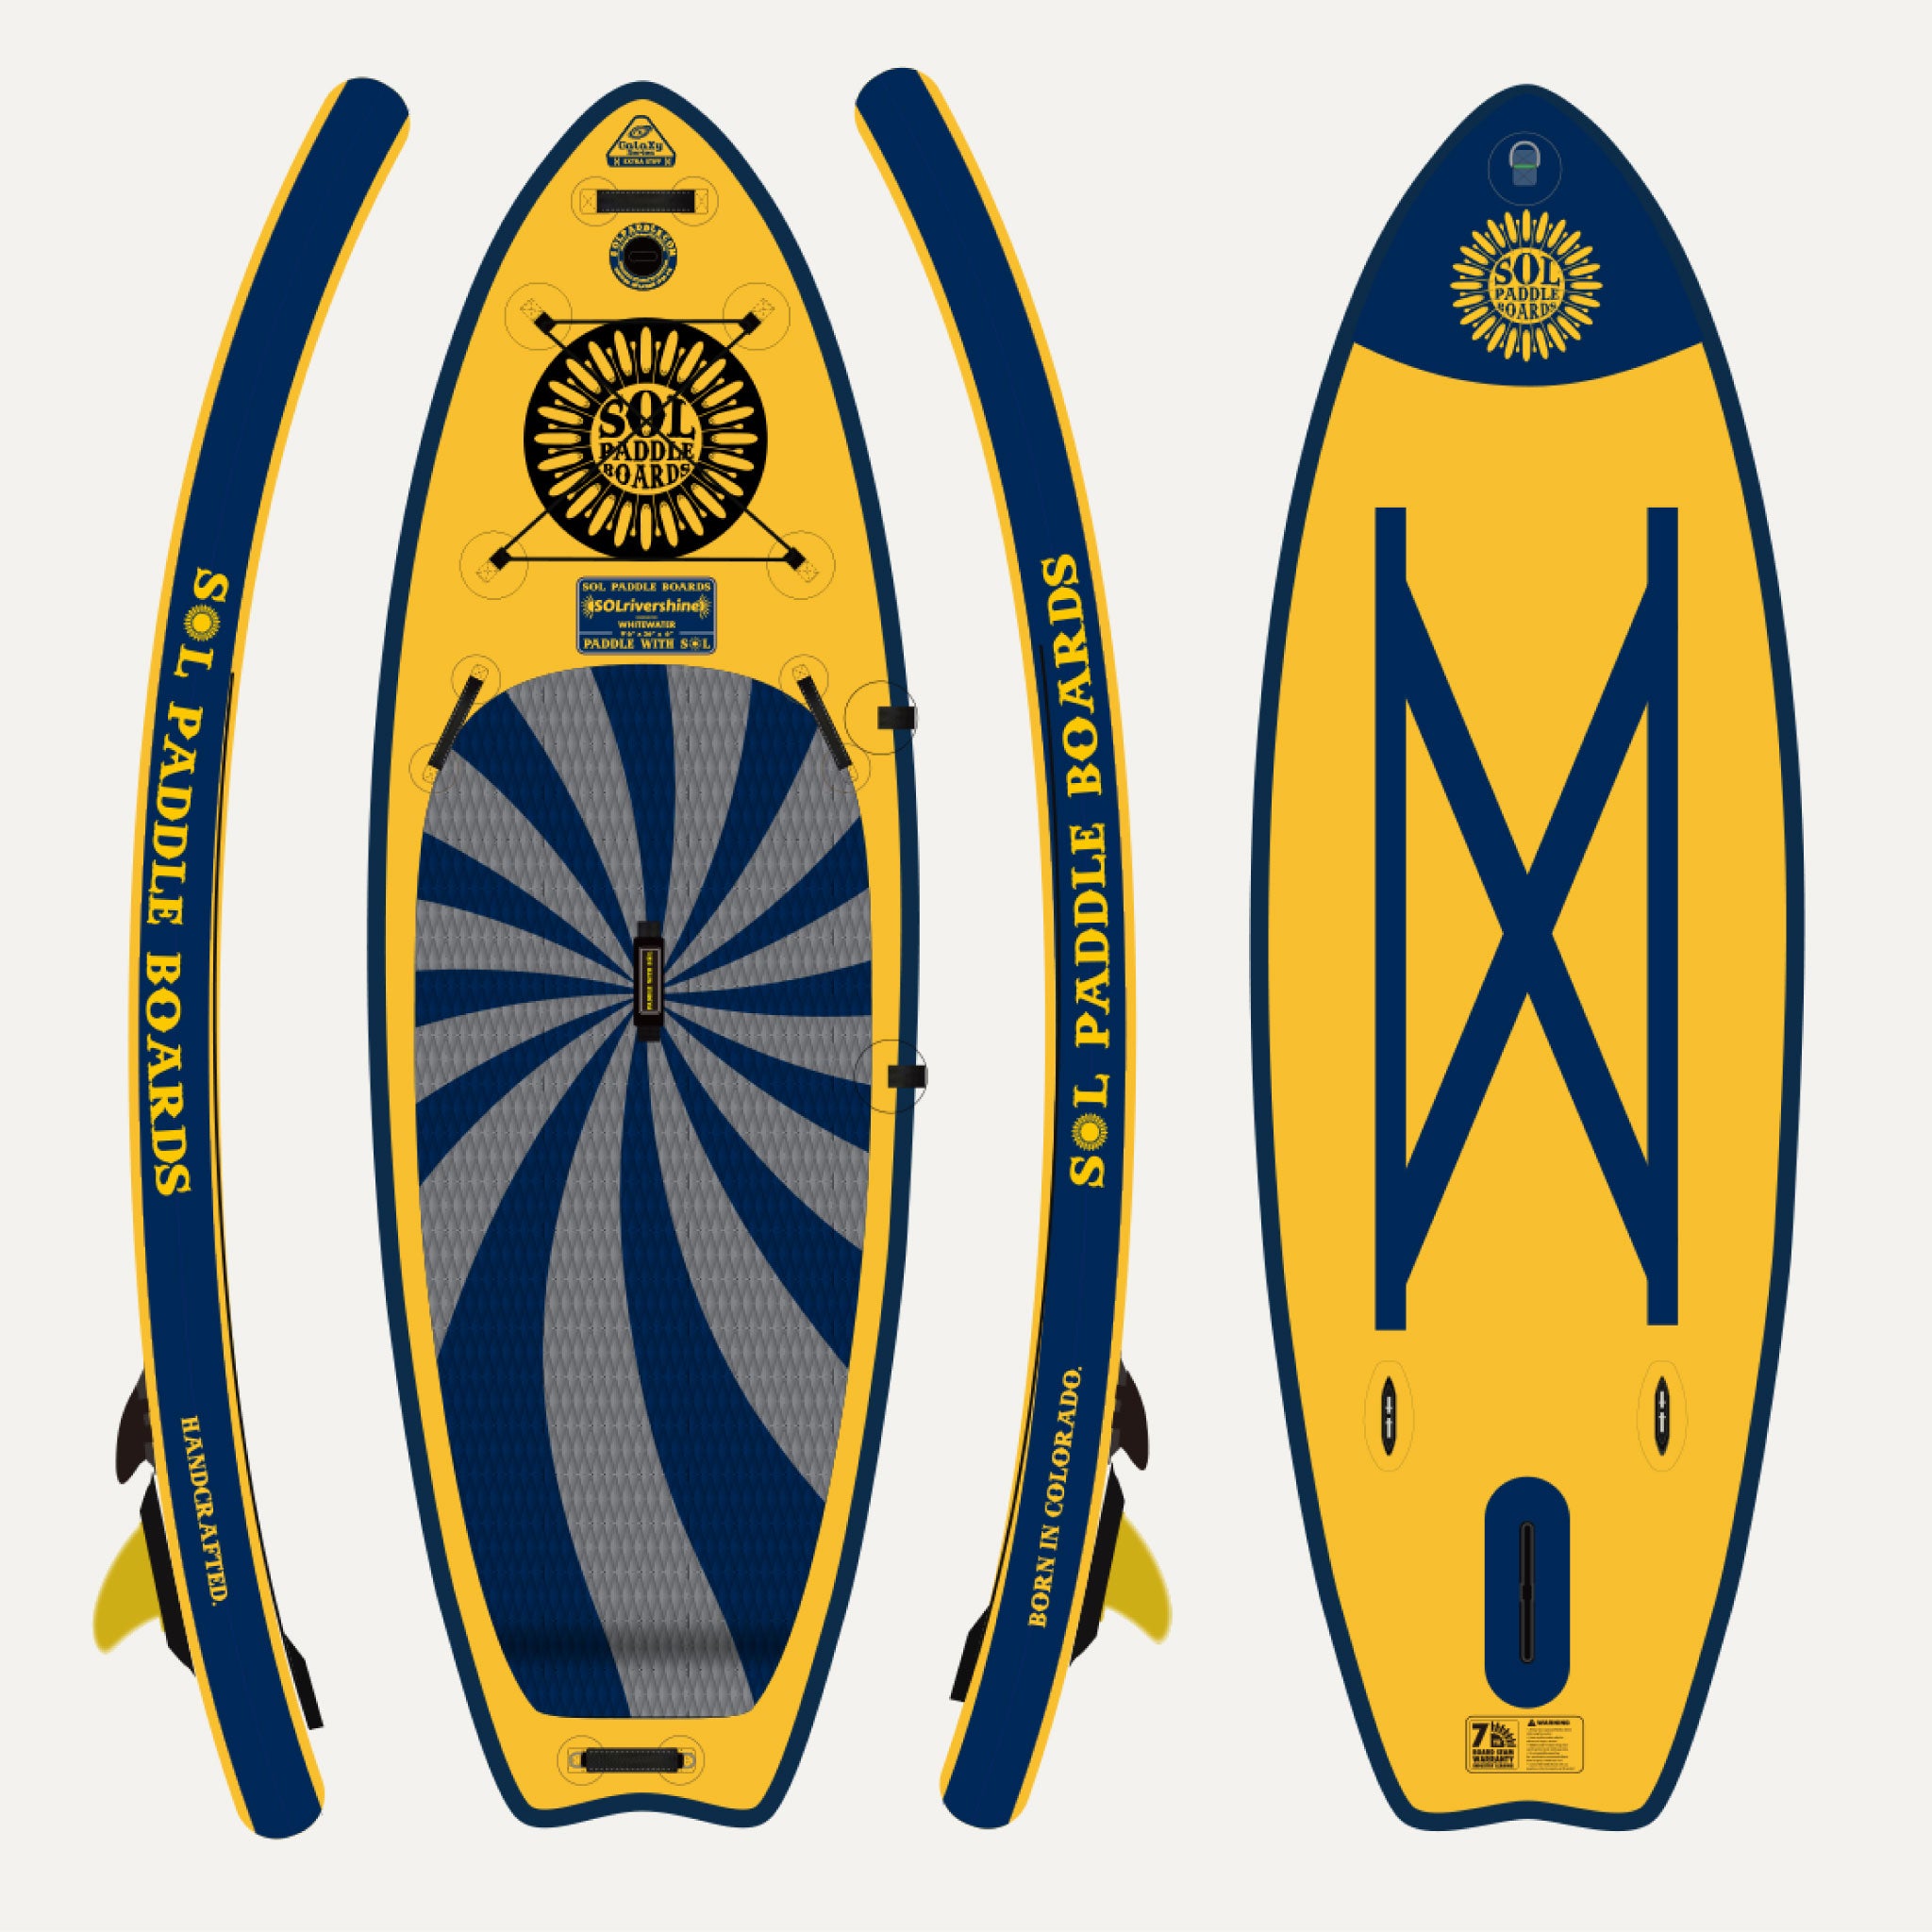 GalaXy SOLrivershine Inflatable Paddle Board showcasing all four sides of the SUP board